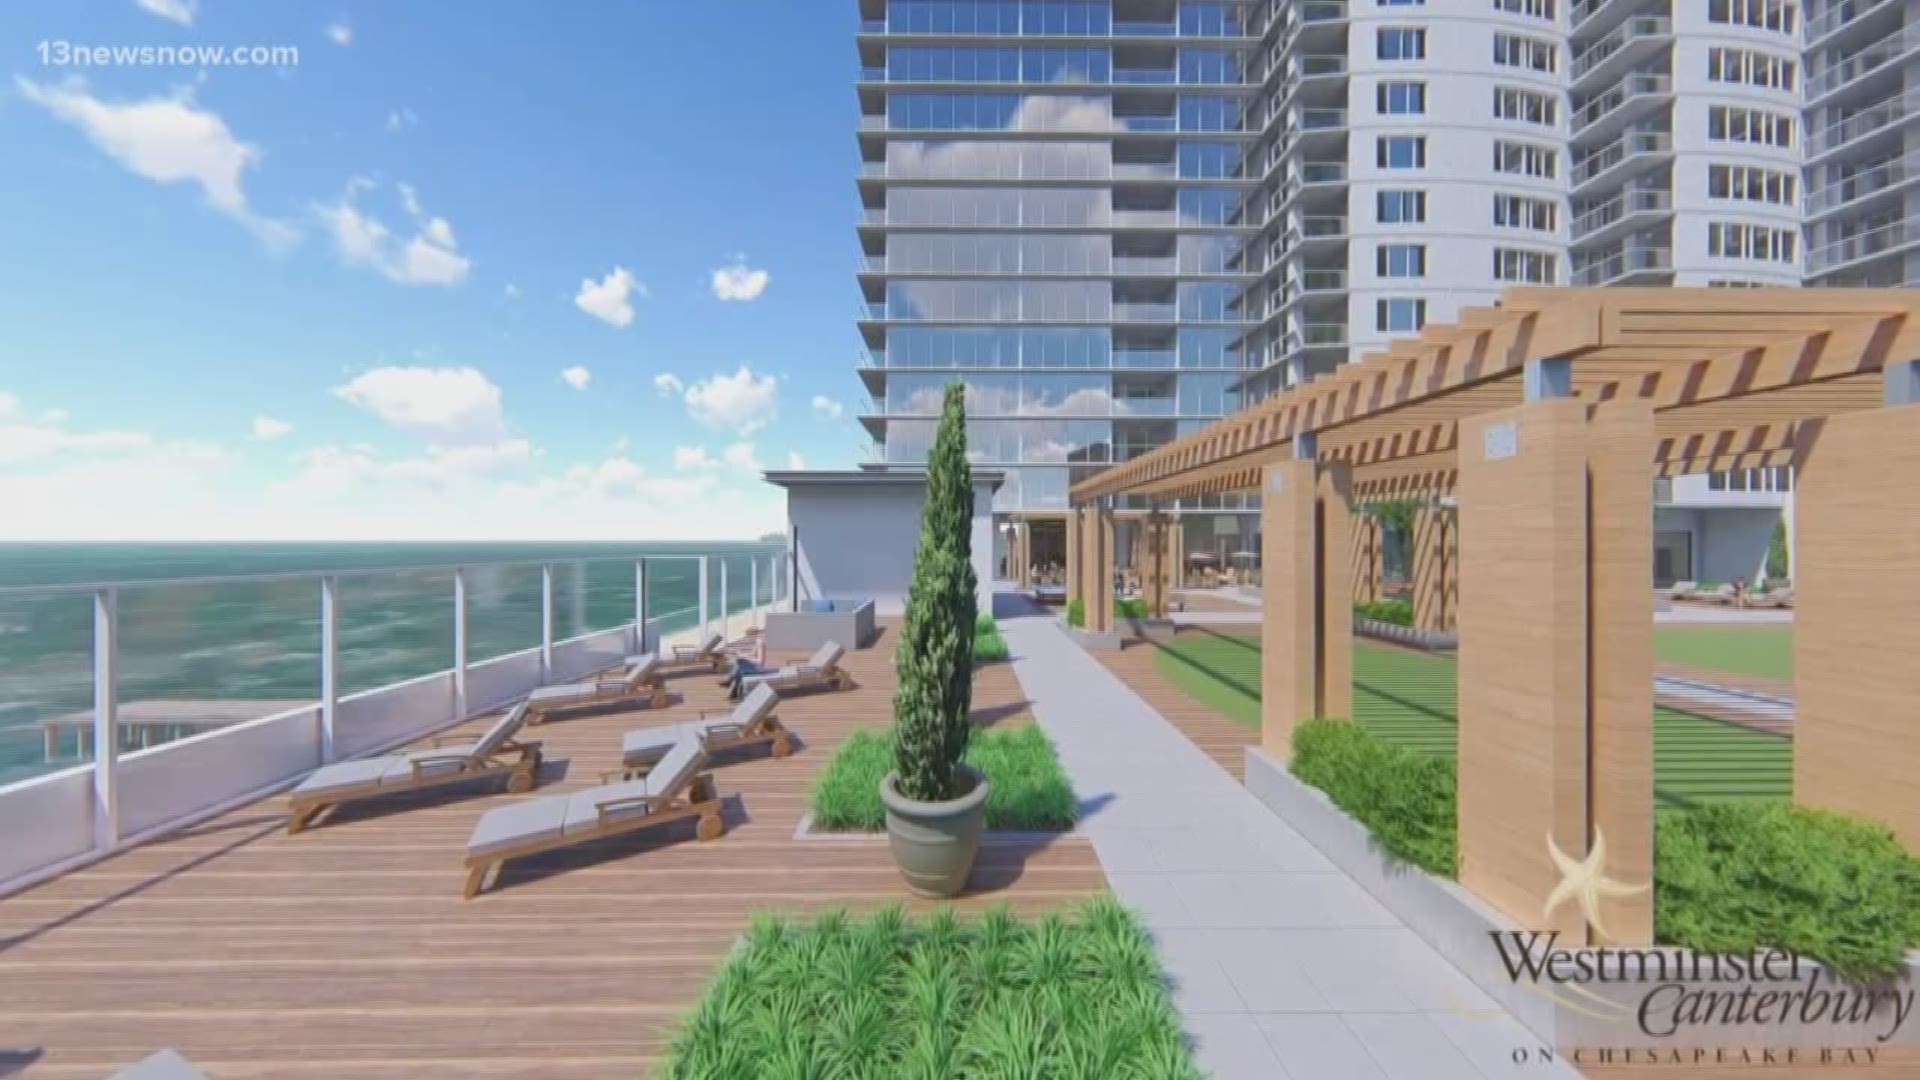 Leaders at Westminster-Canterbury want to build a 22-floor beachside resort. But some say it is too big for the area.